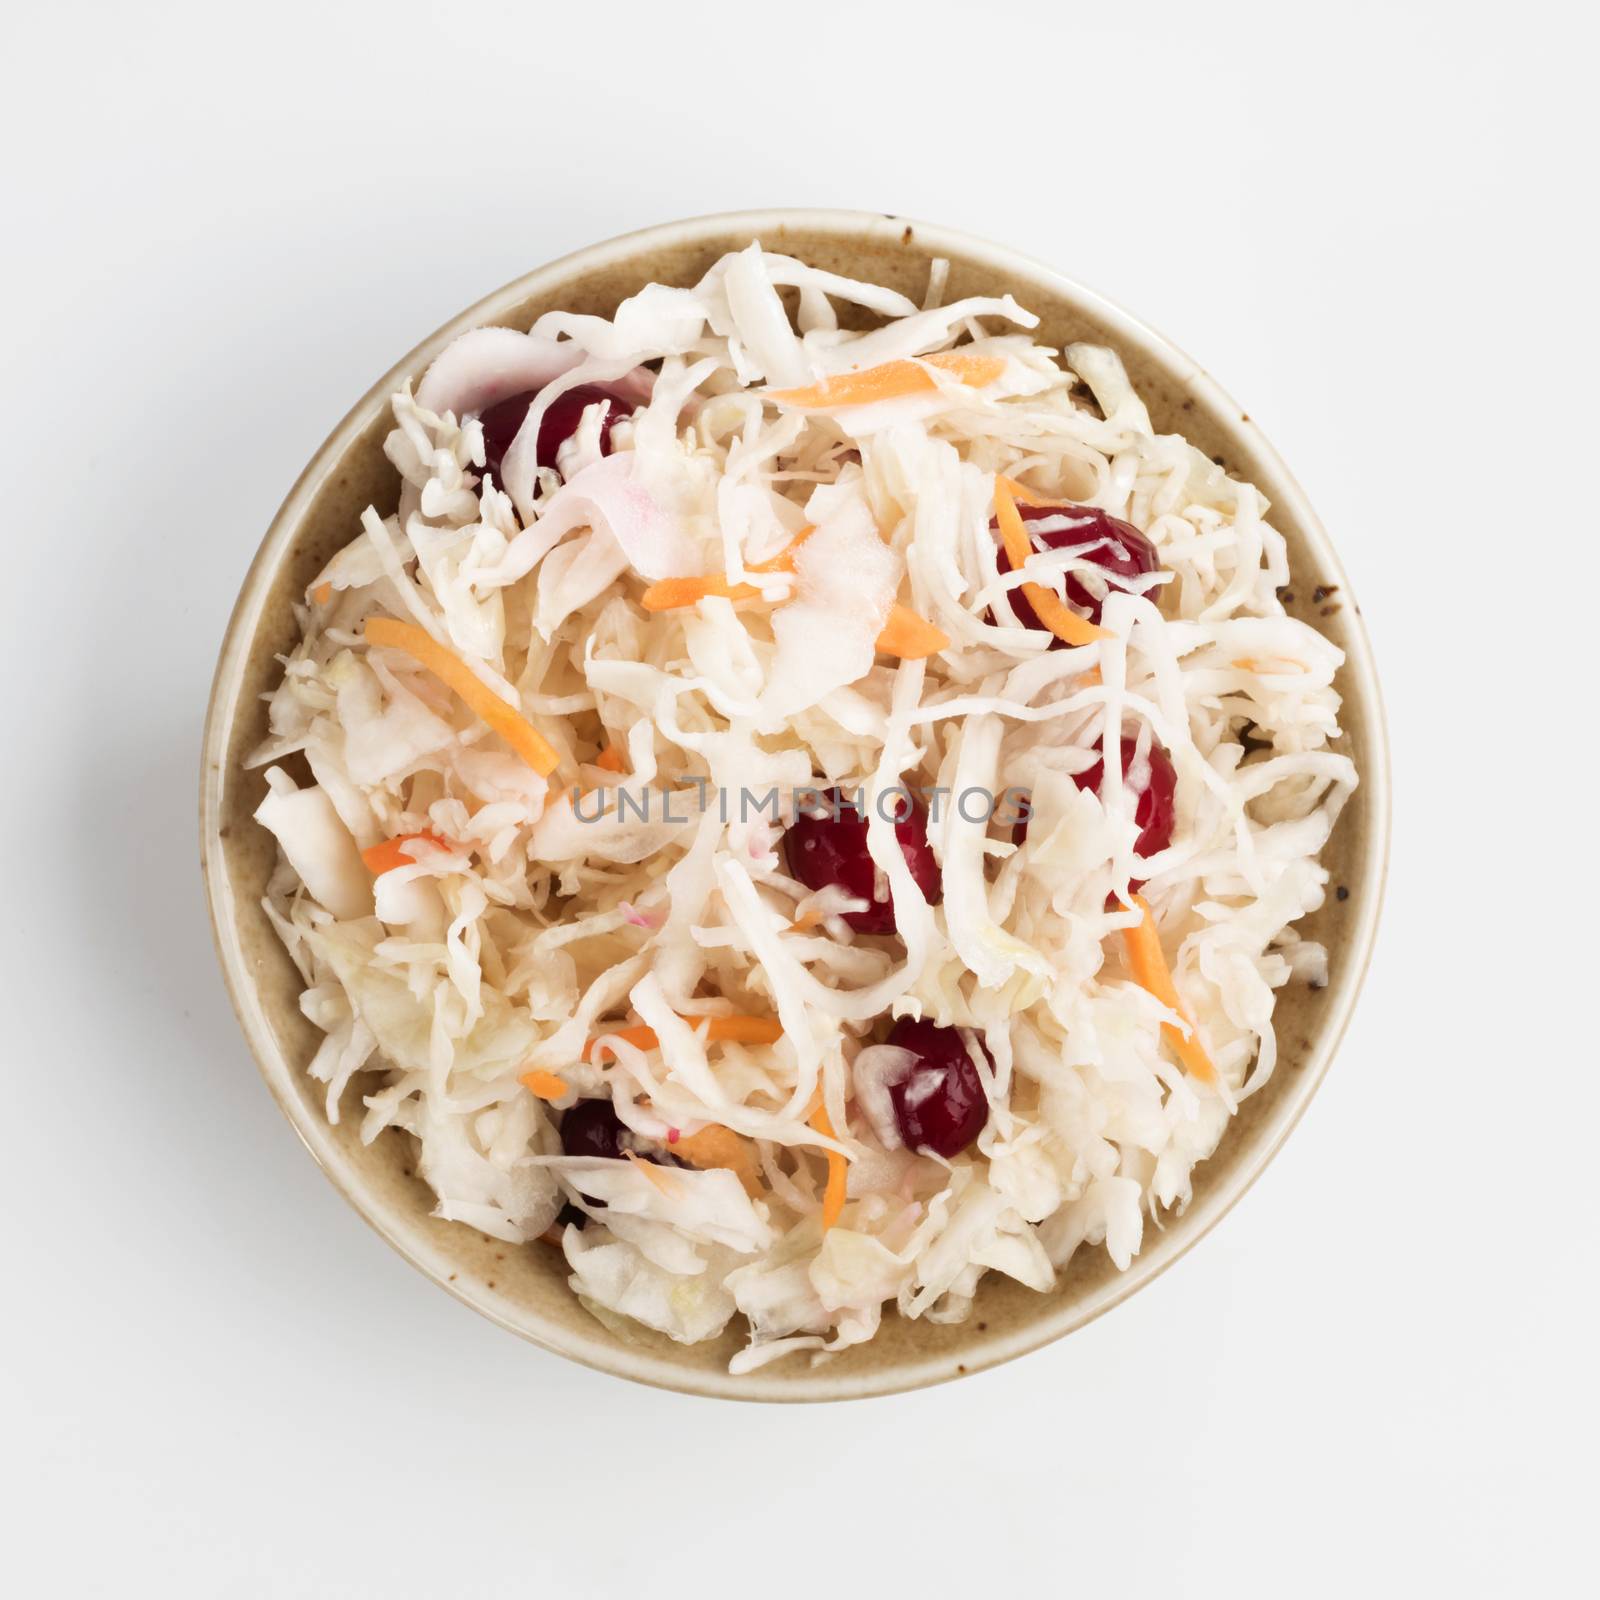 Traditional russian appetizer sauerkraut with cranberry and carrot in craft plate isolated on white. Fermented cabbage. Russian cuisine and russian kitchen. Top view or flat-lay.